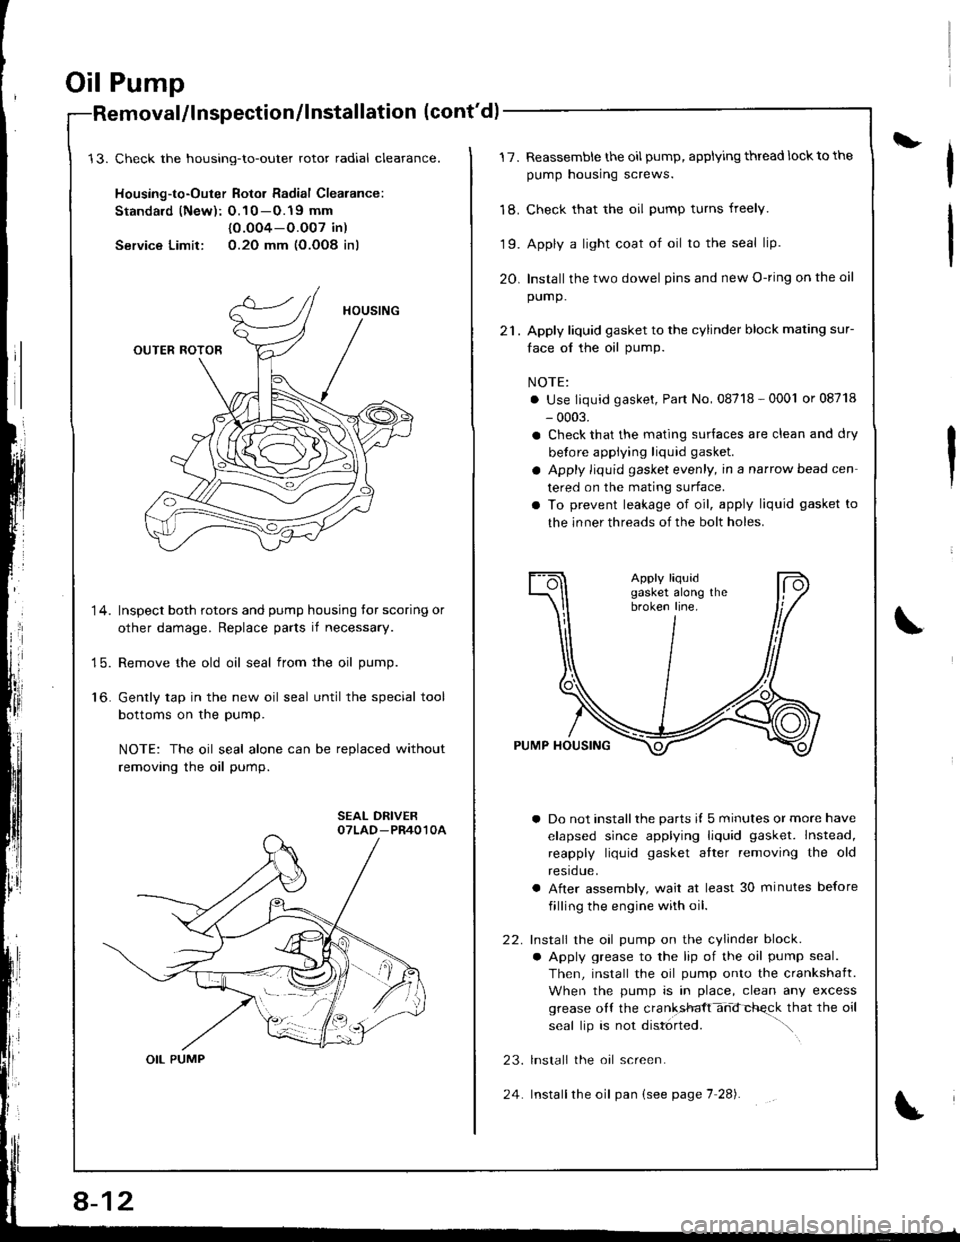 HONDA INTEGRA 1998 4.G Owners Guide Oil Pump
Check the housing-to-outer rotor radial cleatance.
Housing-to-Outer Rotor Radial Clearance:
Standald (New): O.10 -O.19 mm
{0.O04-O.O07 in)
Service Limit: 0.2O mm (O.OO8 inl
Inspect both rotor